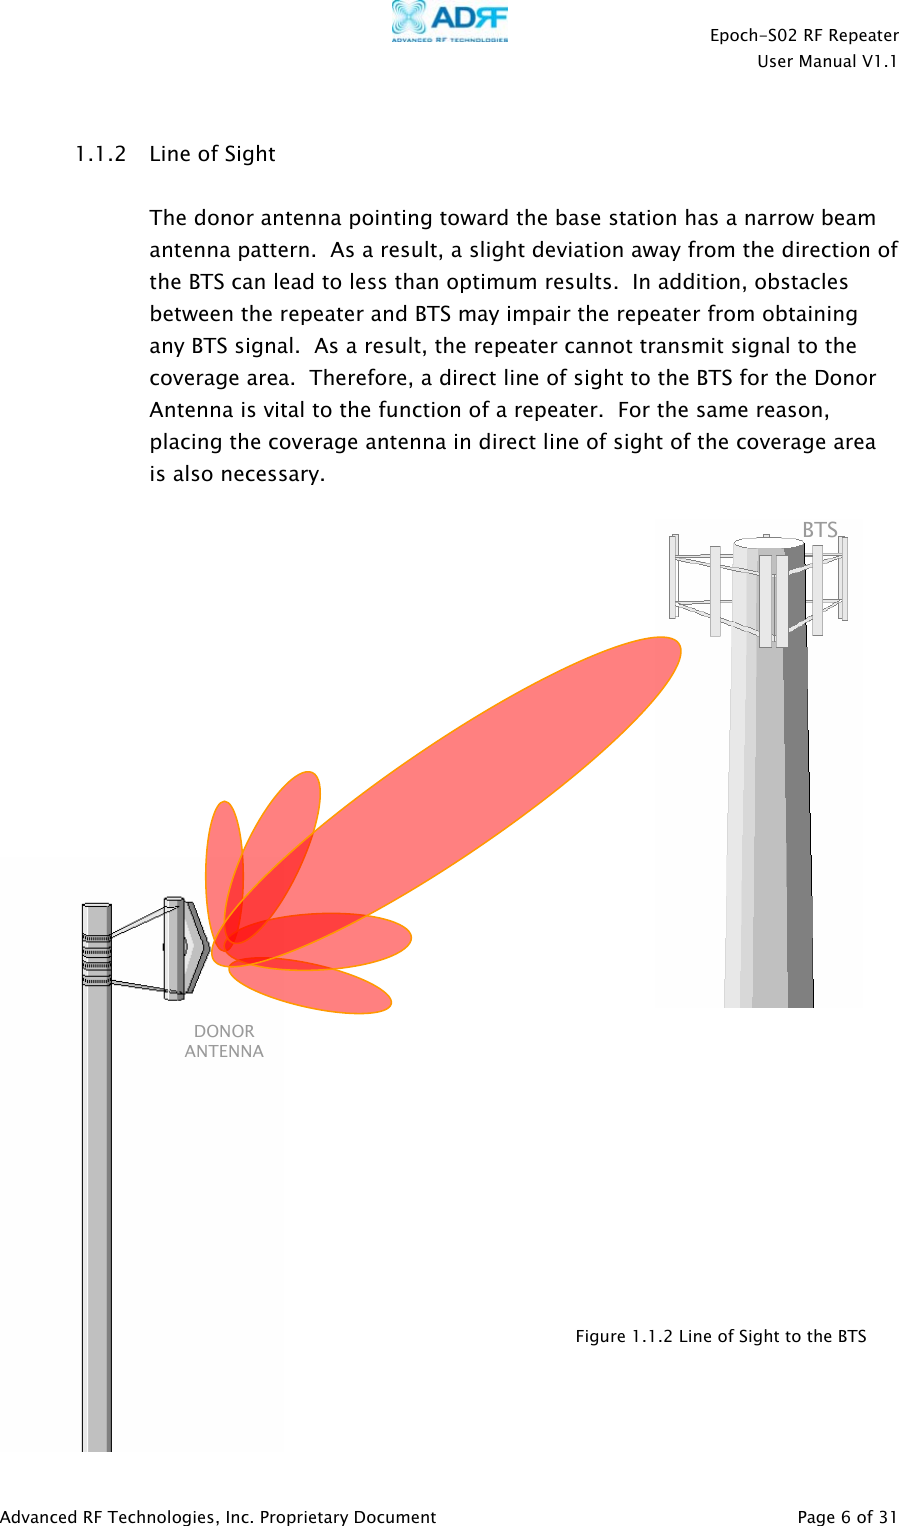    Epoch-S02 RF Repeater  User Manual V1.1   1.1.2 Line of Sight   The donor antenna pointing toward the base station has a narrow beam antenna pattern.  As a result, a slight deviation away from the direction of the BTS can lead to less than optimum results.  In addition, obstacles between the repeater and BTS may impair the repeater from obtaining any BTS signal.  As a result, the repeater cannot transmit signal to the coverage area.  Therefore, a direct line of sight to the BTS for the Donor Antenna is vital to the function of a repeater.  For the same reason, placing the coverage antenna in direct line of sight of the coverage area is also necessary.                                DONOR ANTENNA BTSFigure 1.1.2 Line of Sight to the BTS Advanced RF Technologies, Inc. Proprietary Document   Page 6 of 31  